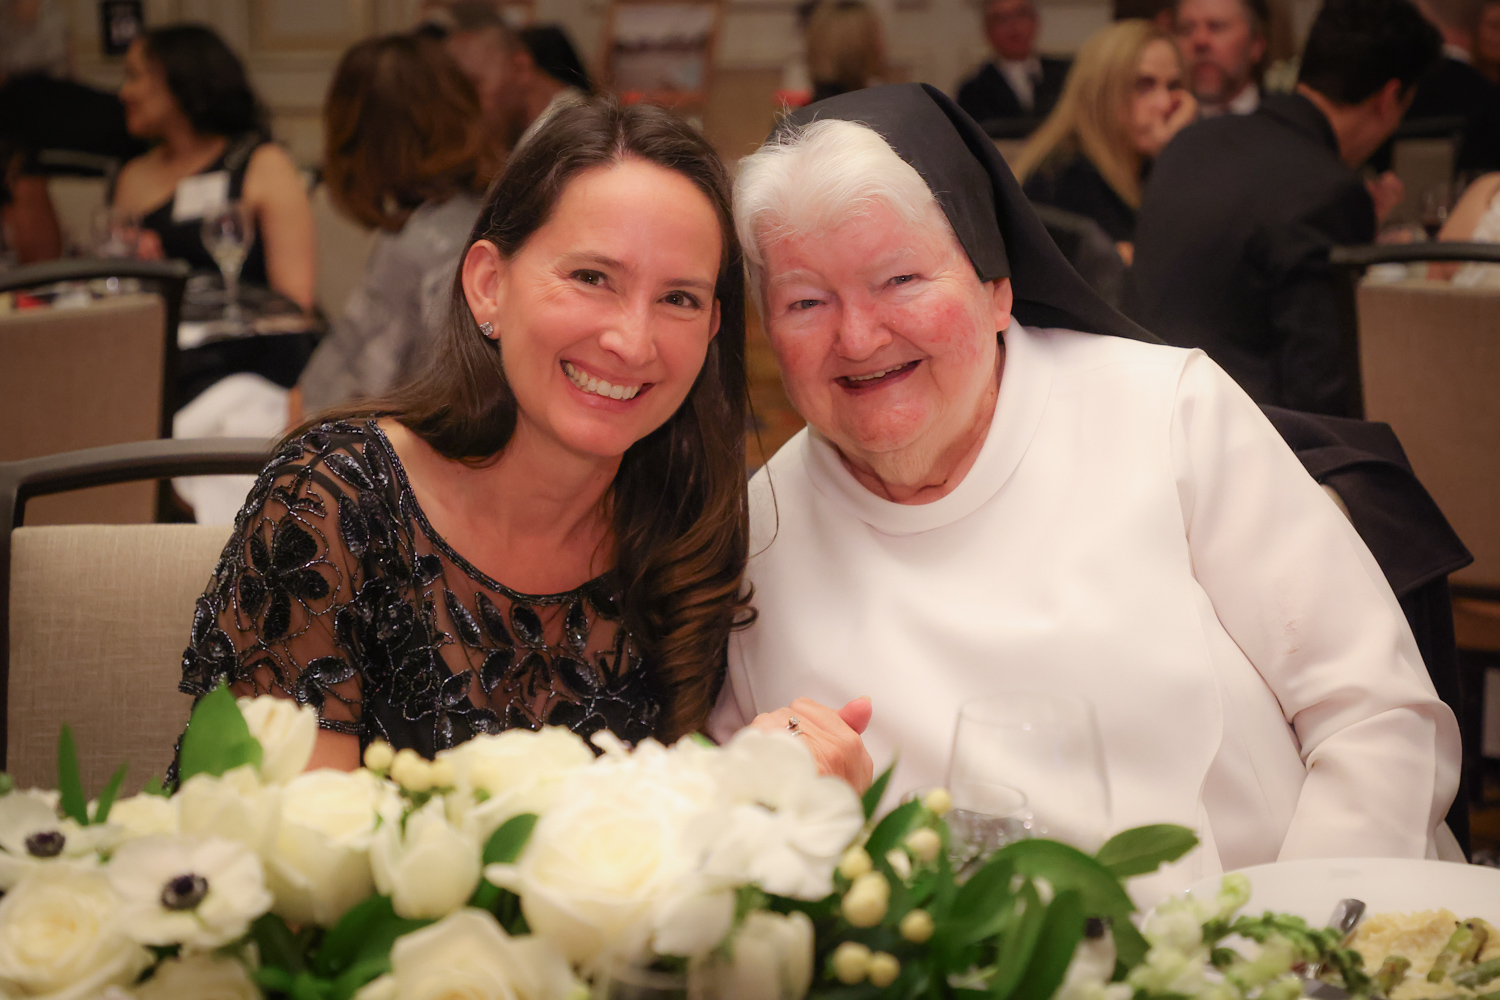 Mrs. Marlena Conroy and Sr. Carolyn enjoying each others company at The Black and White Ball. Picture taken by Keats Elliot. 